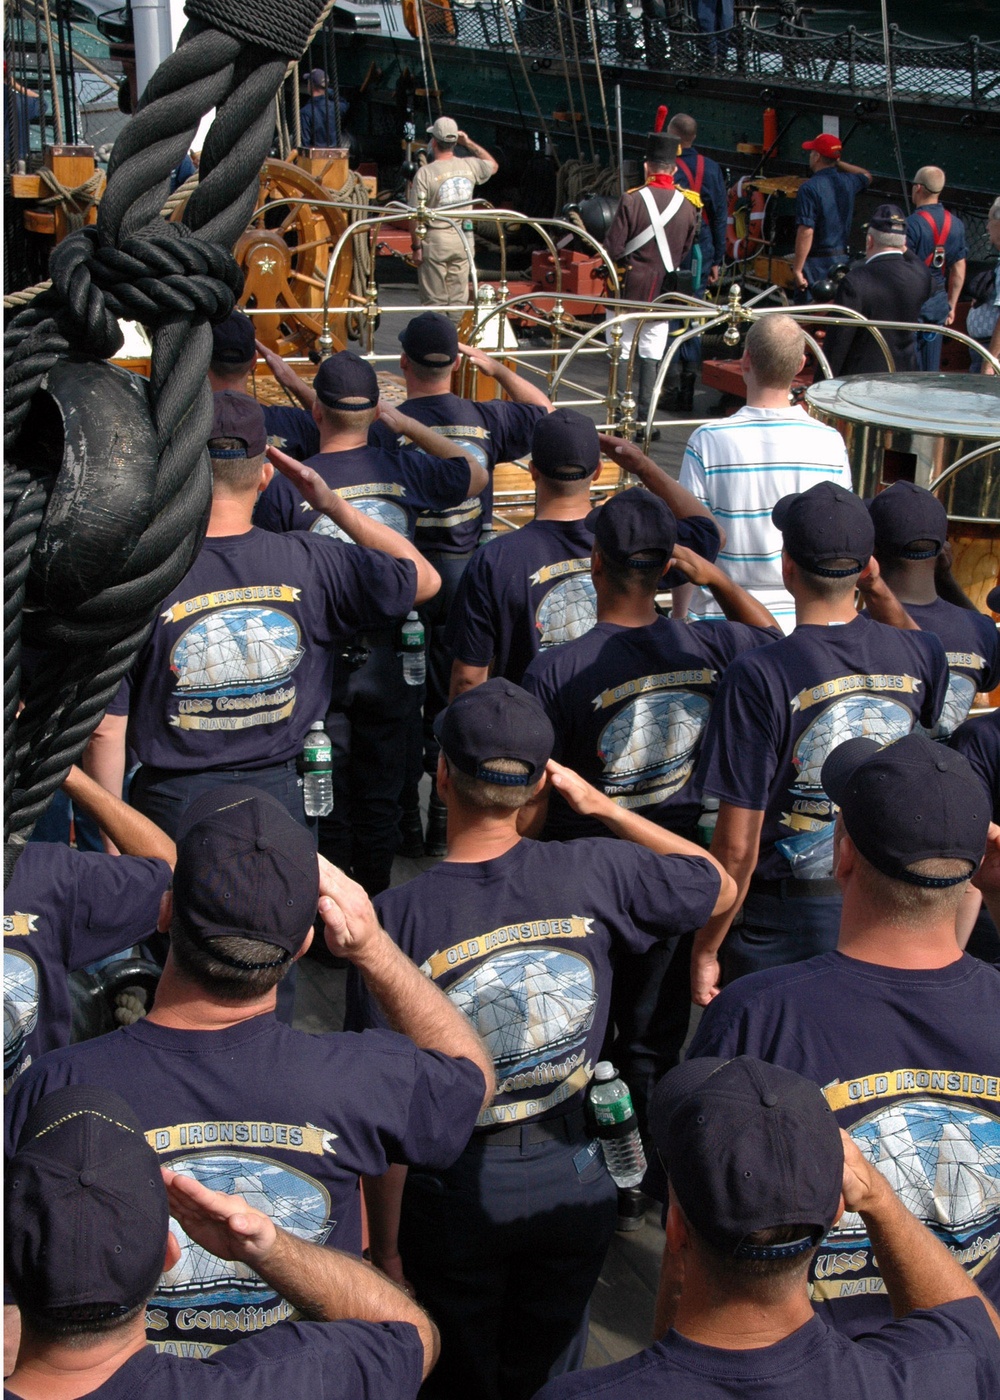 Chief Petty Officer Selectees Man the Sails of USS Constitution